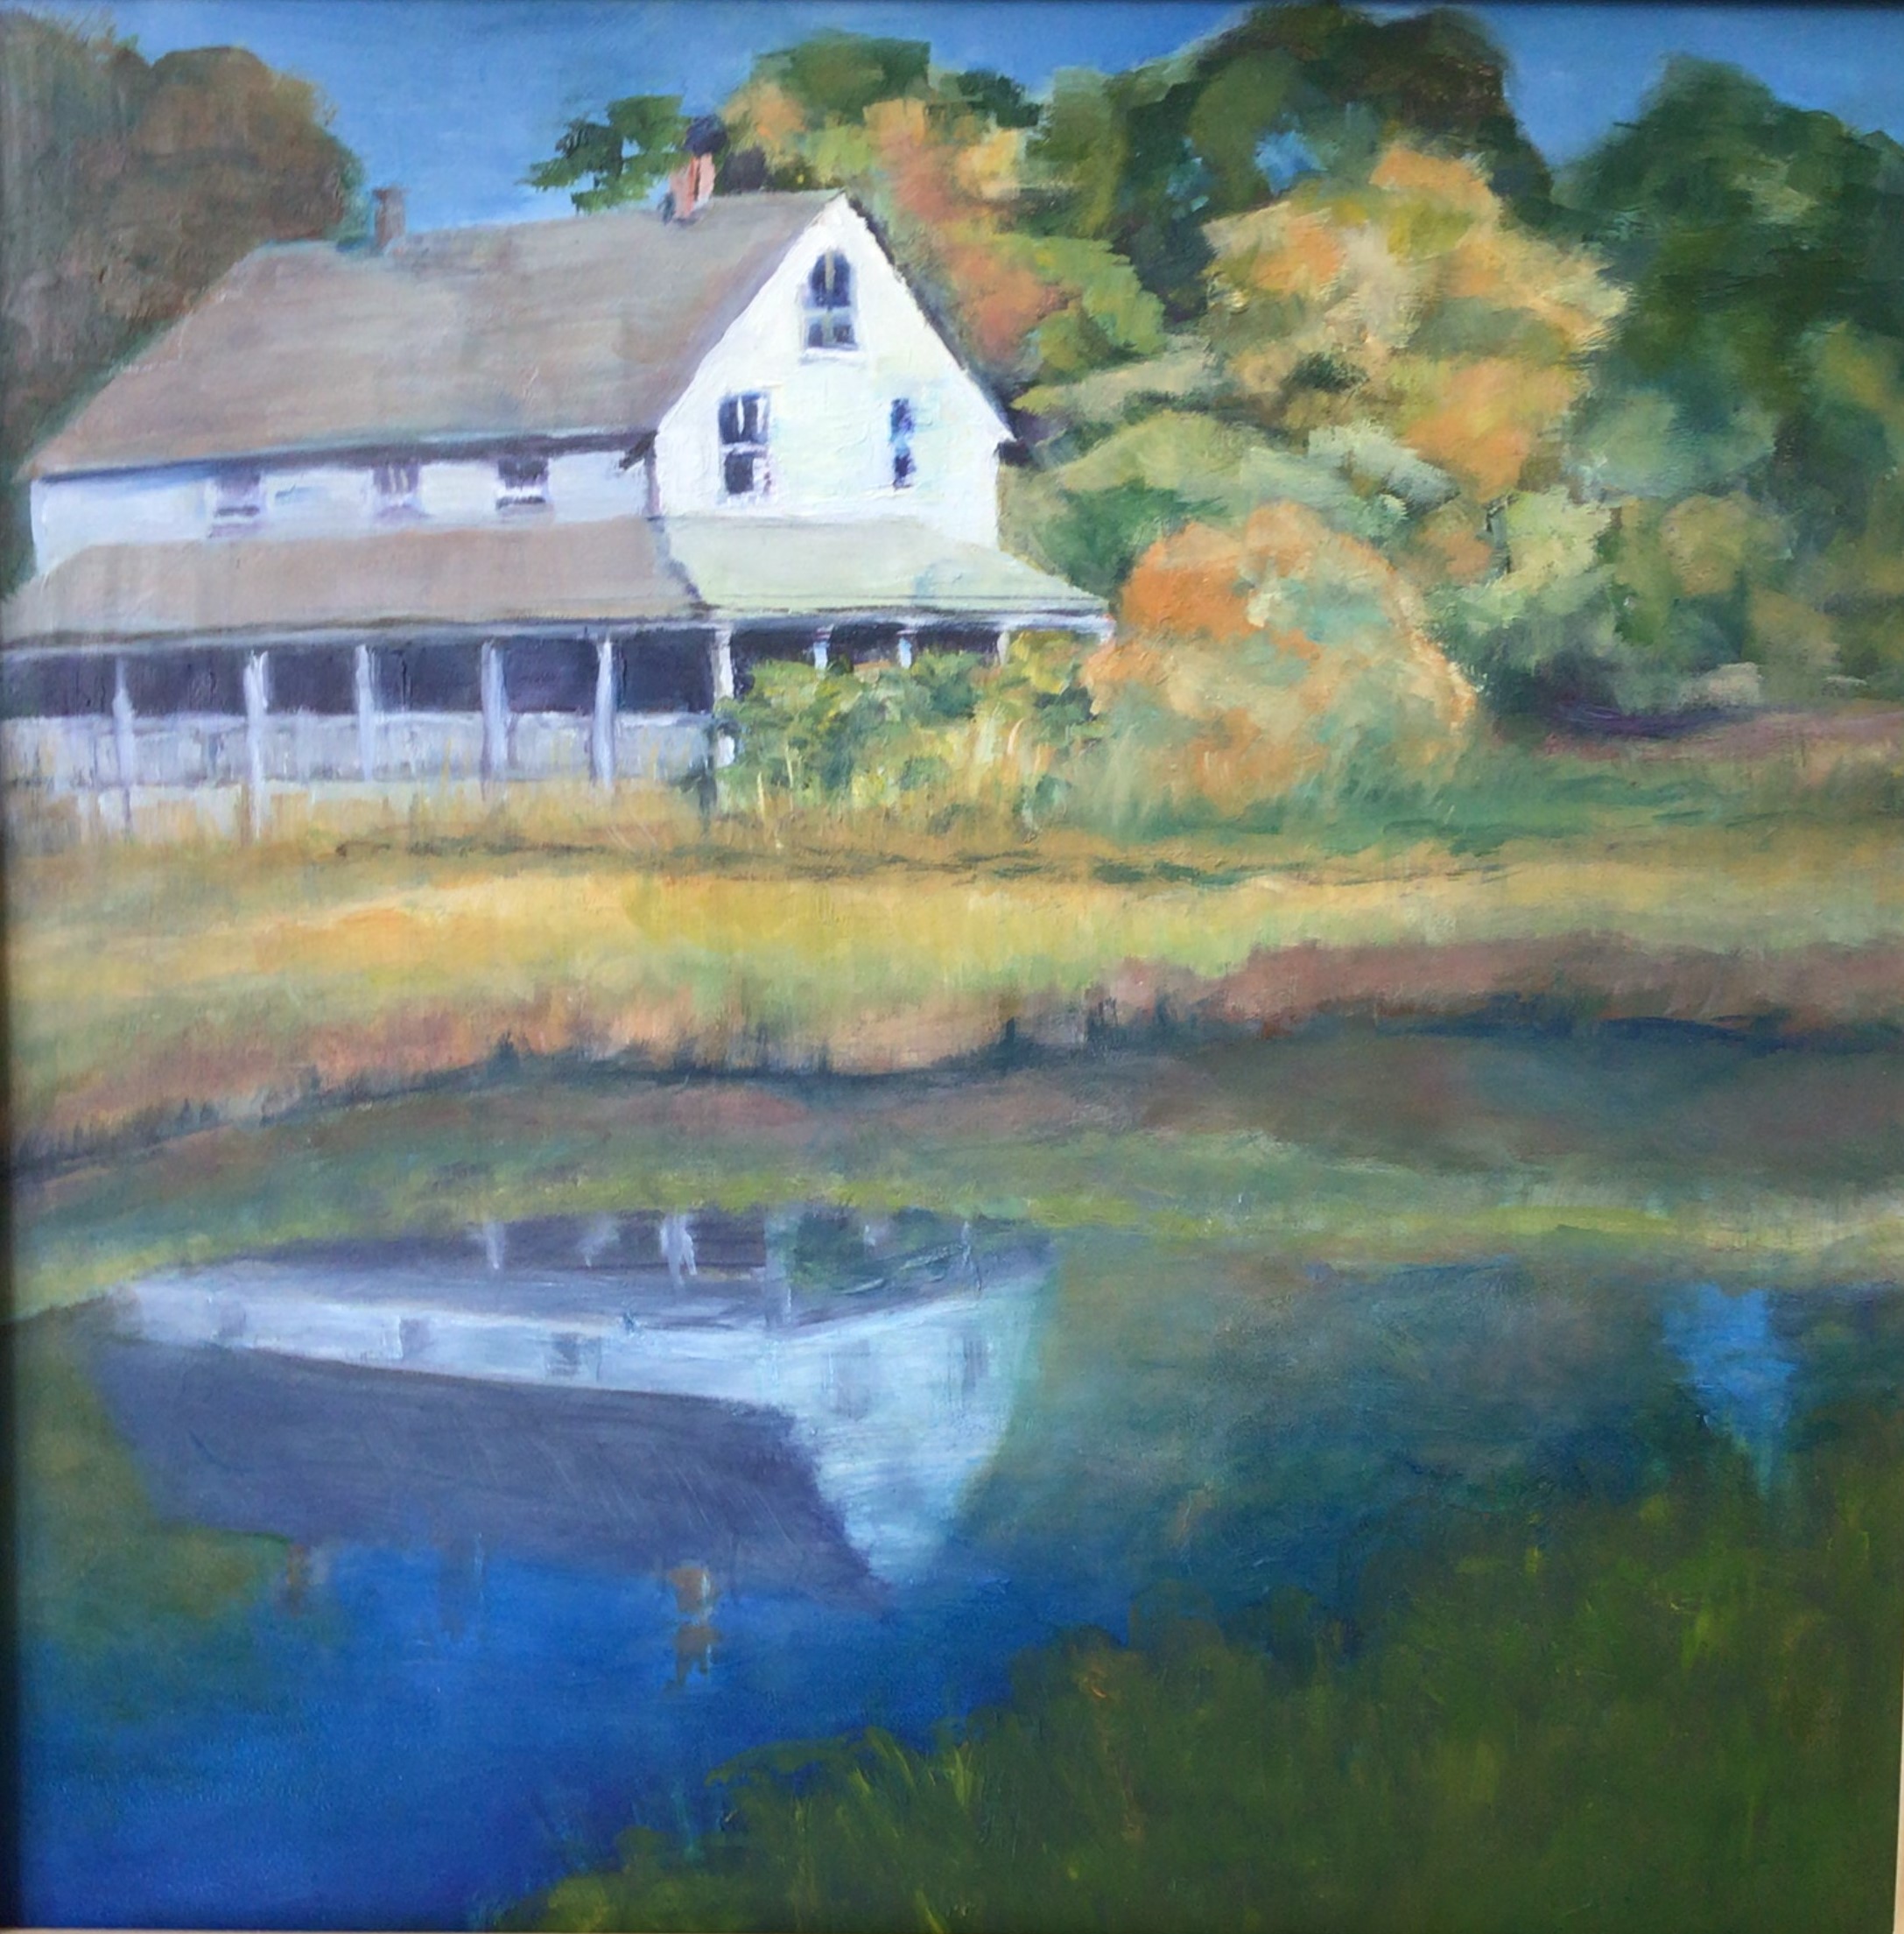 Painting of a building on the edge of a stream.